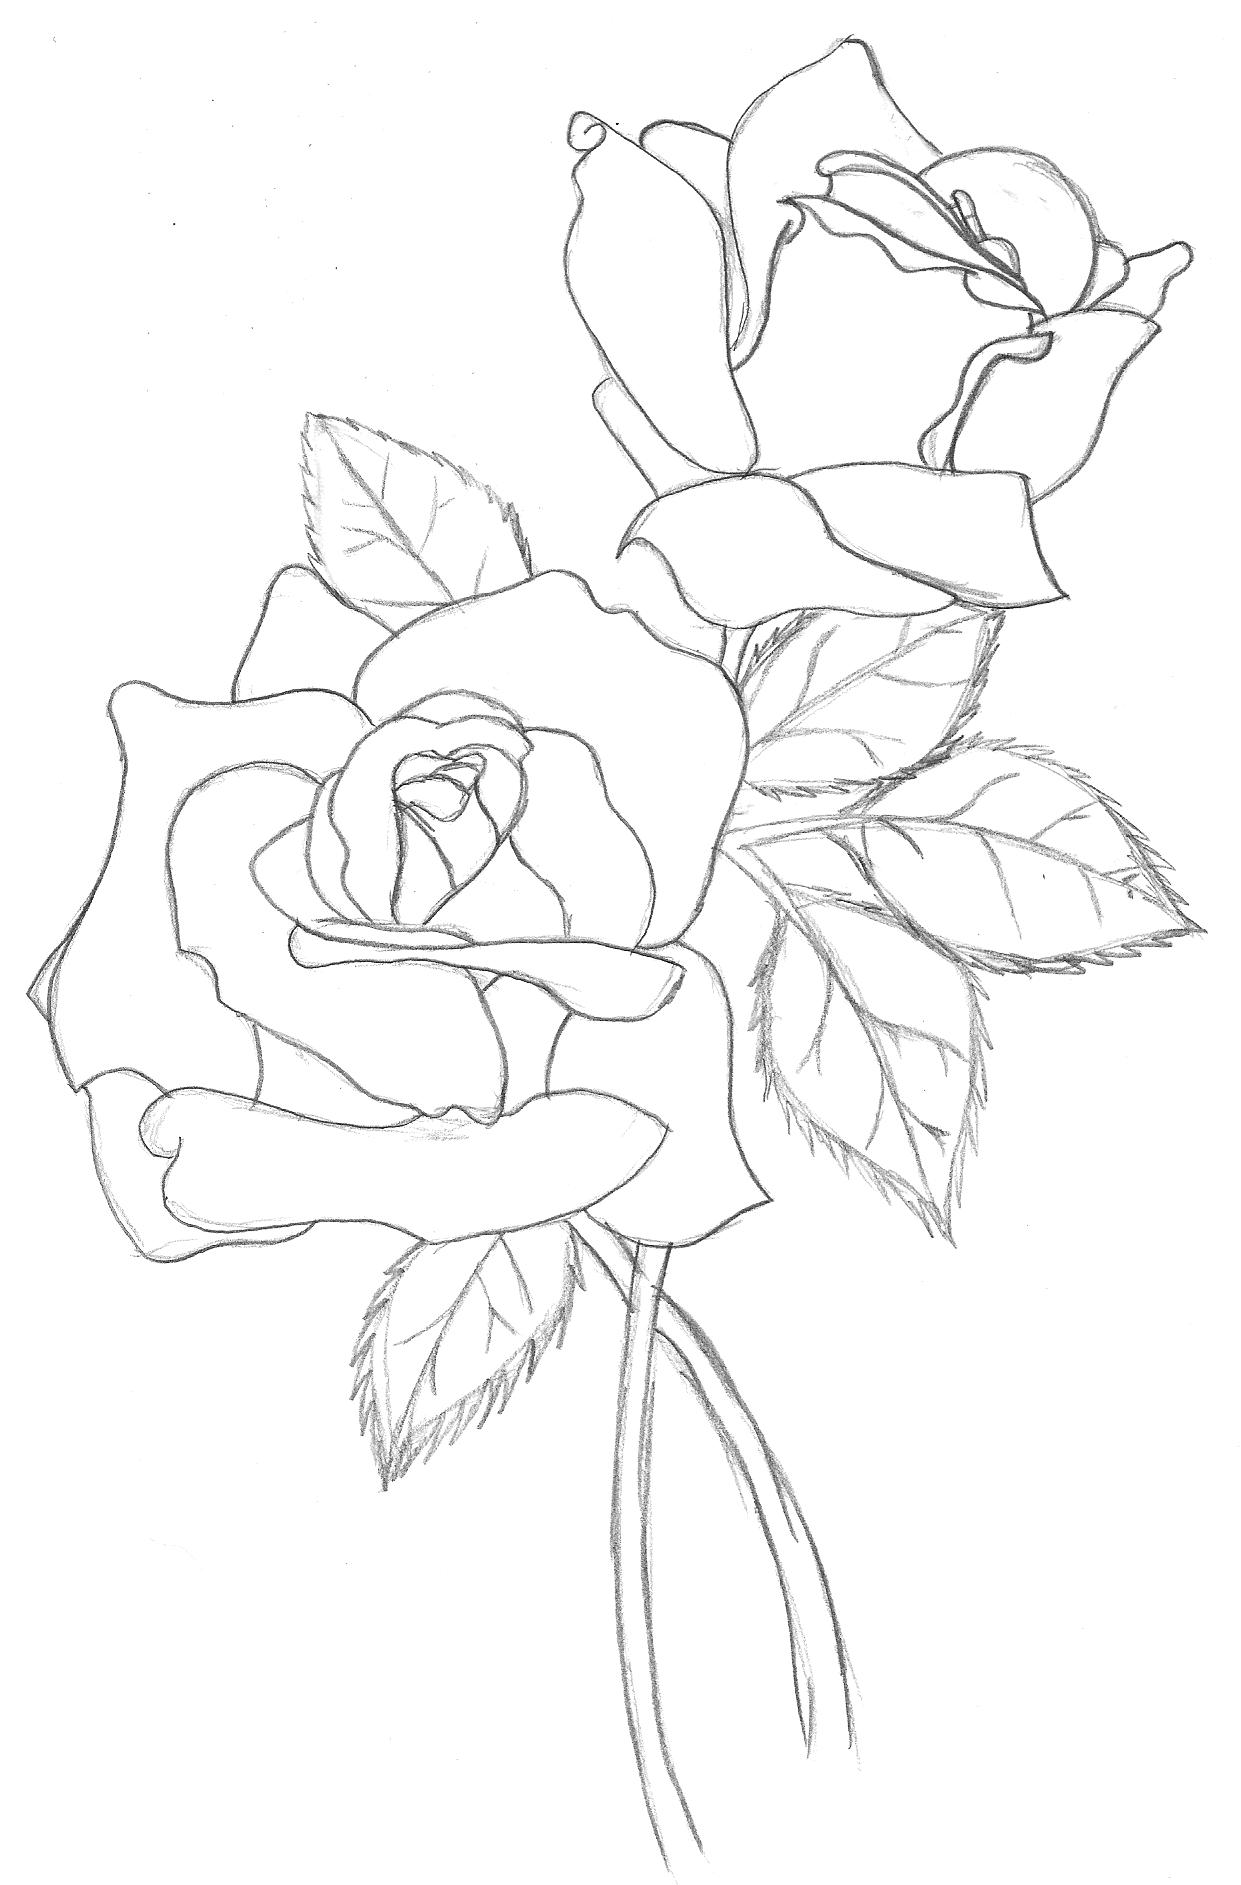 Roses-Outline by Ashton18 on Clipart library